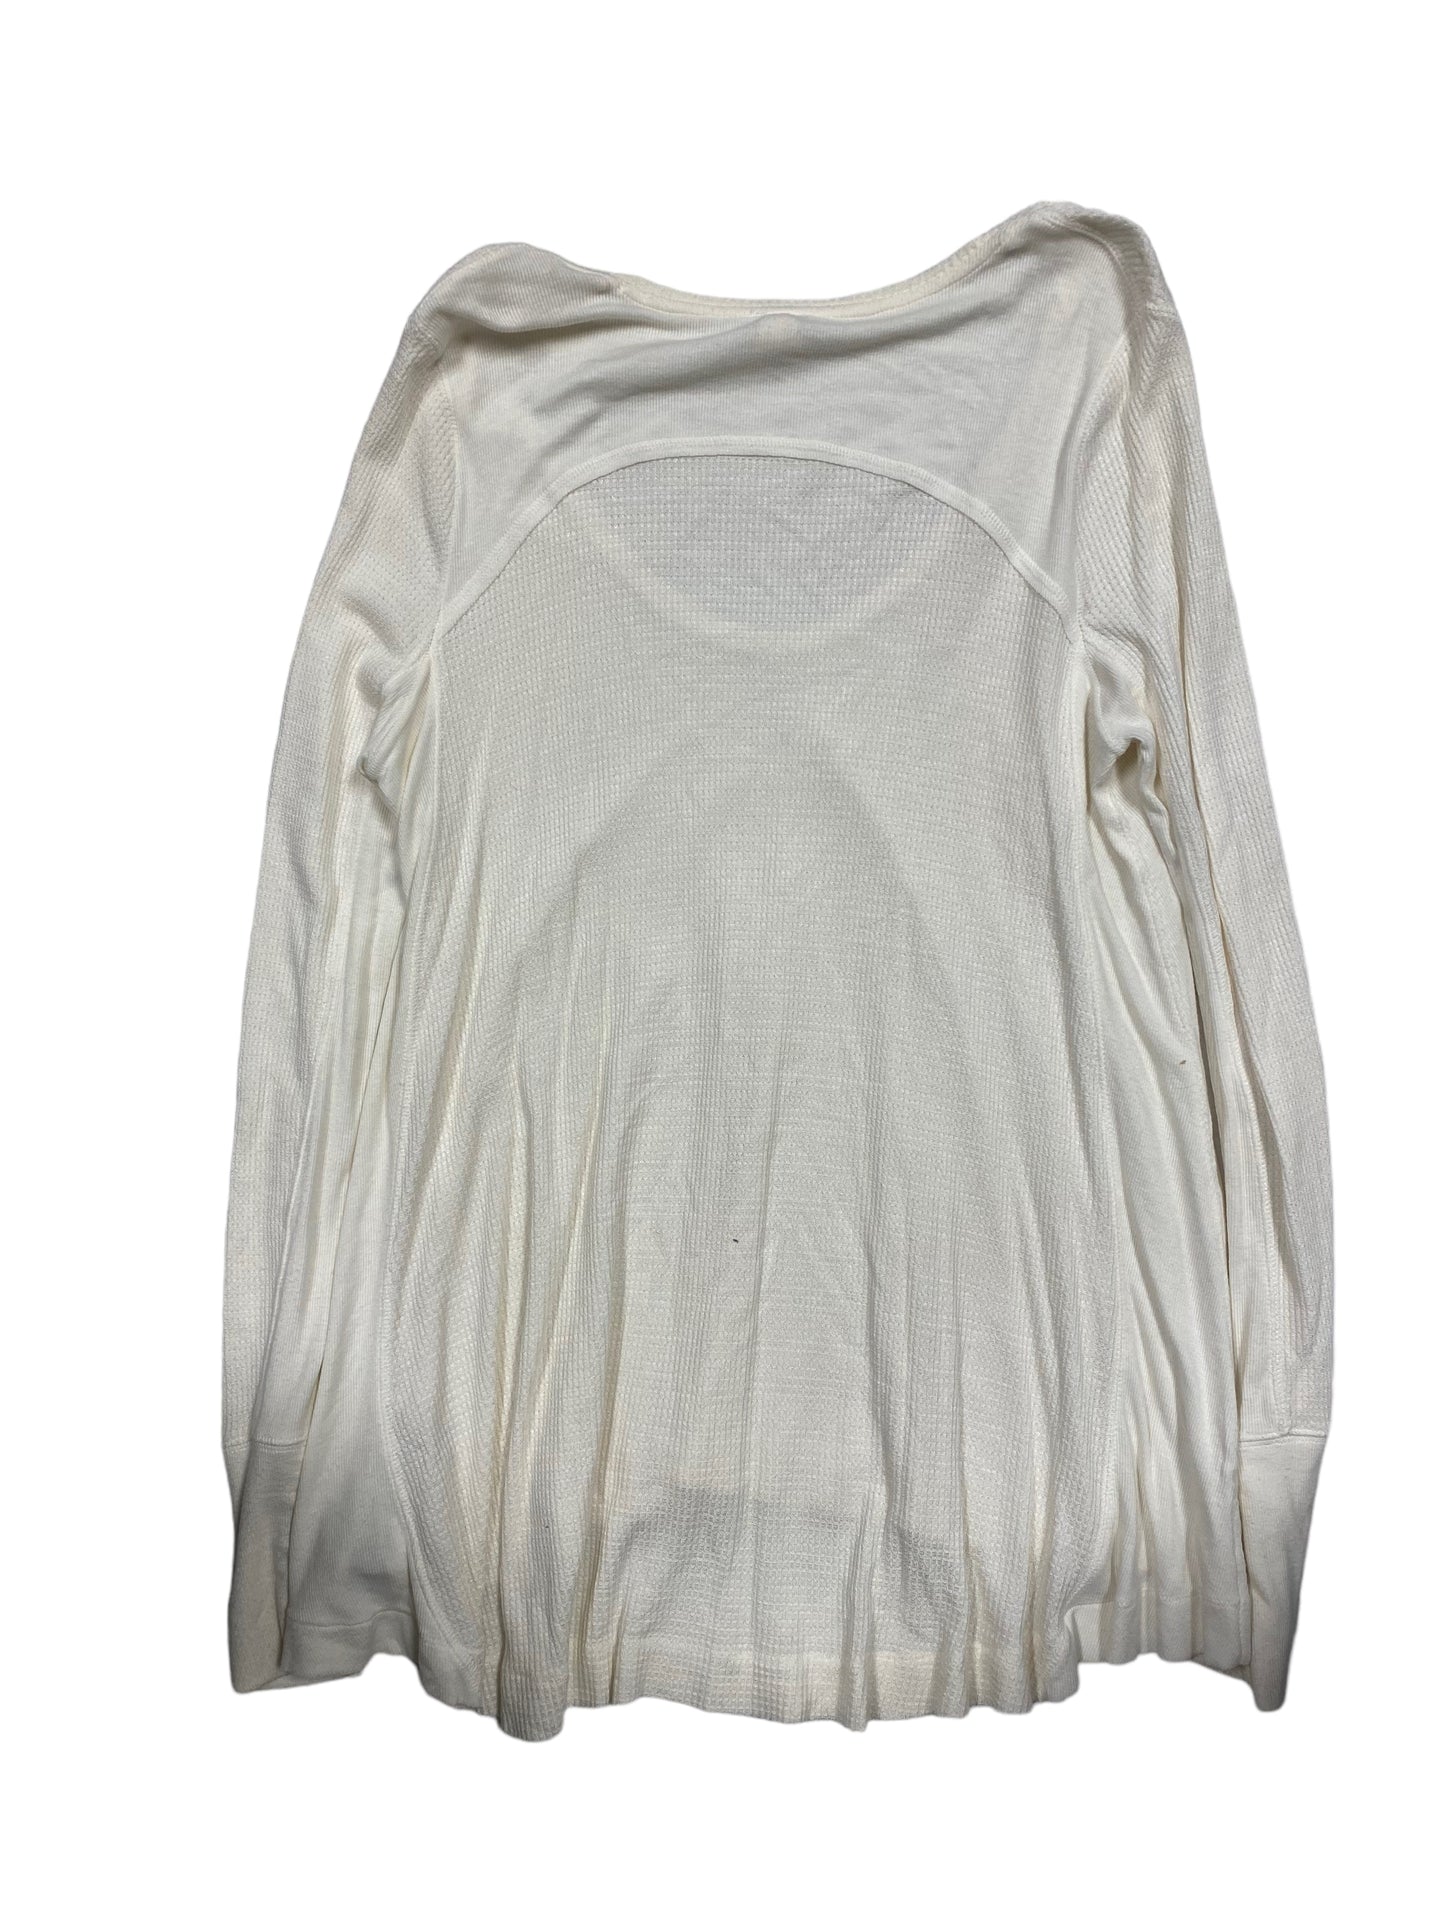 Cream Top Long Sleeve Free People, Size M